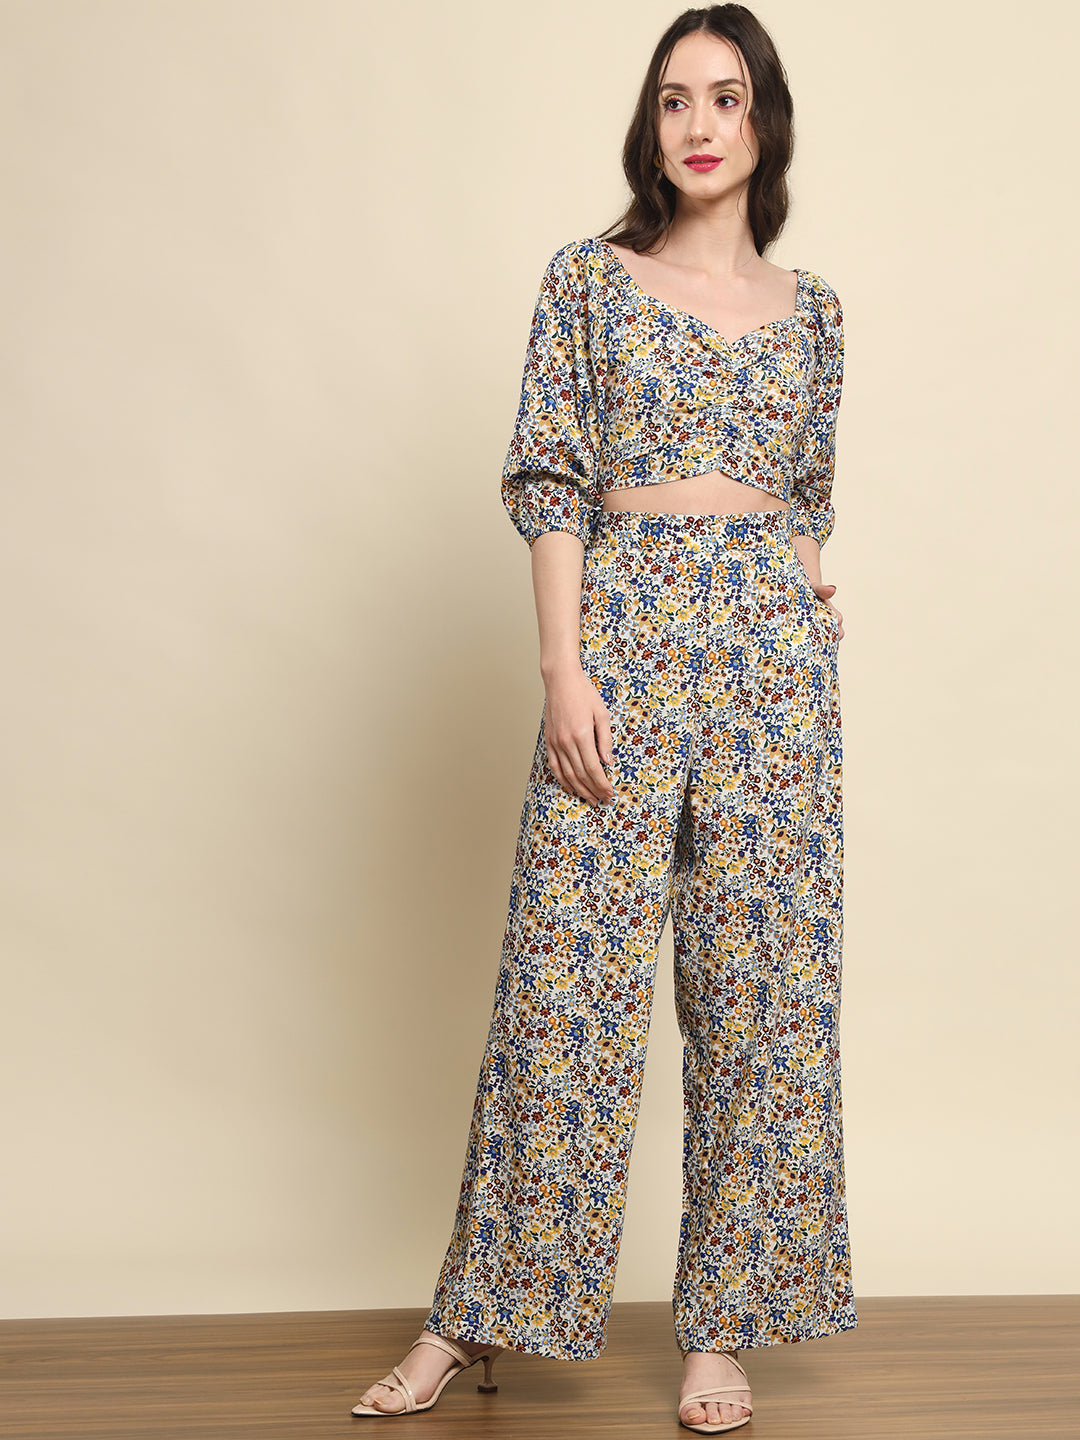 multi colored floral printed co-ord set